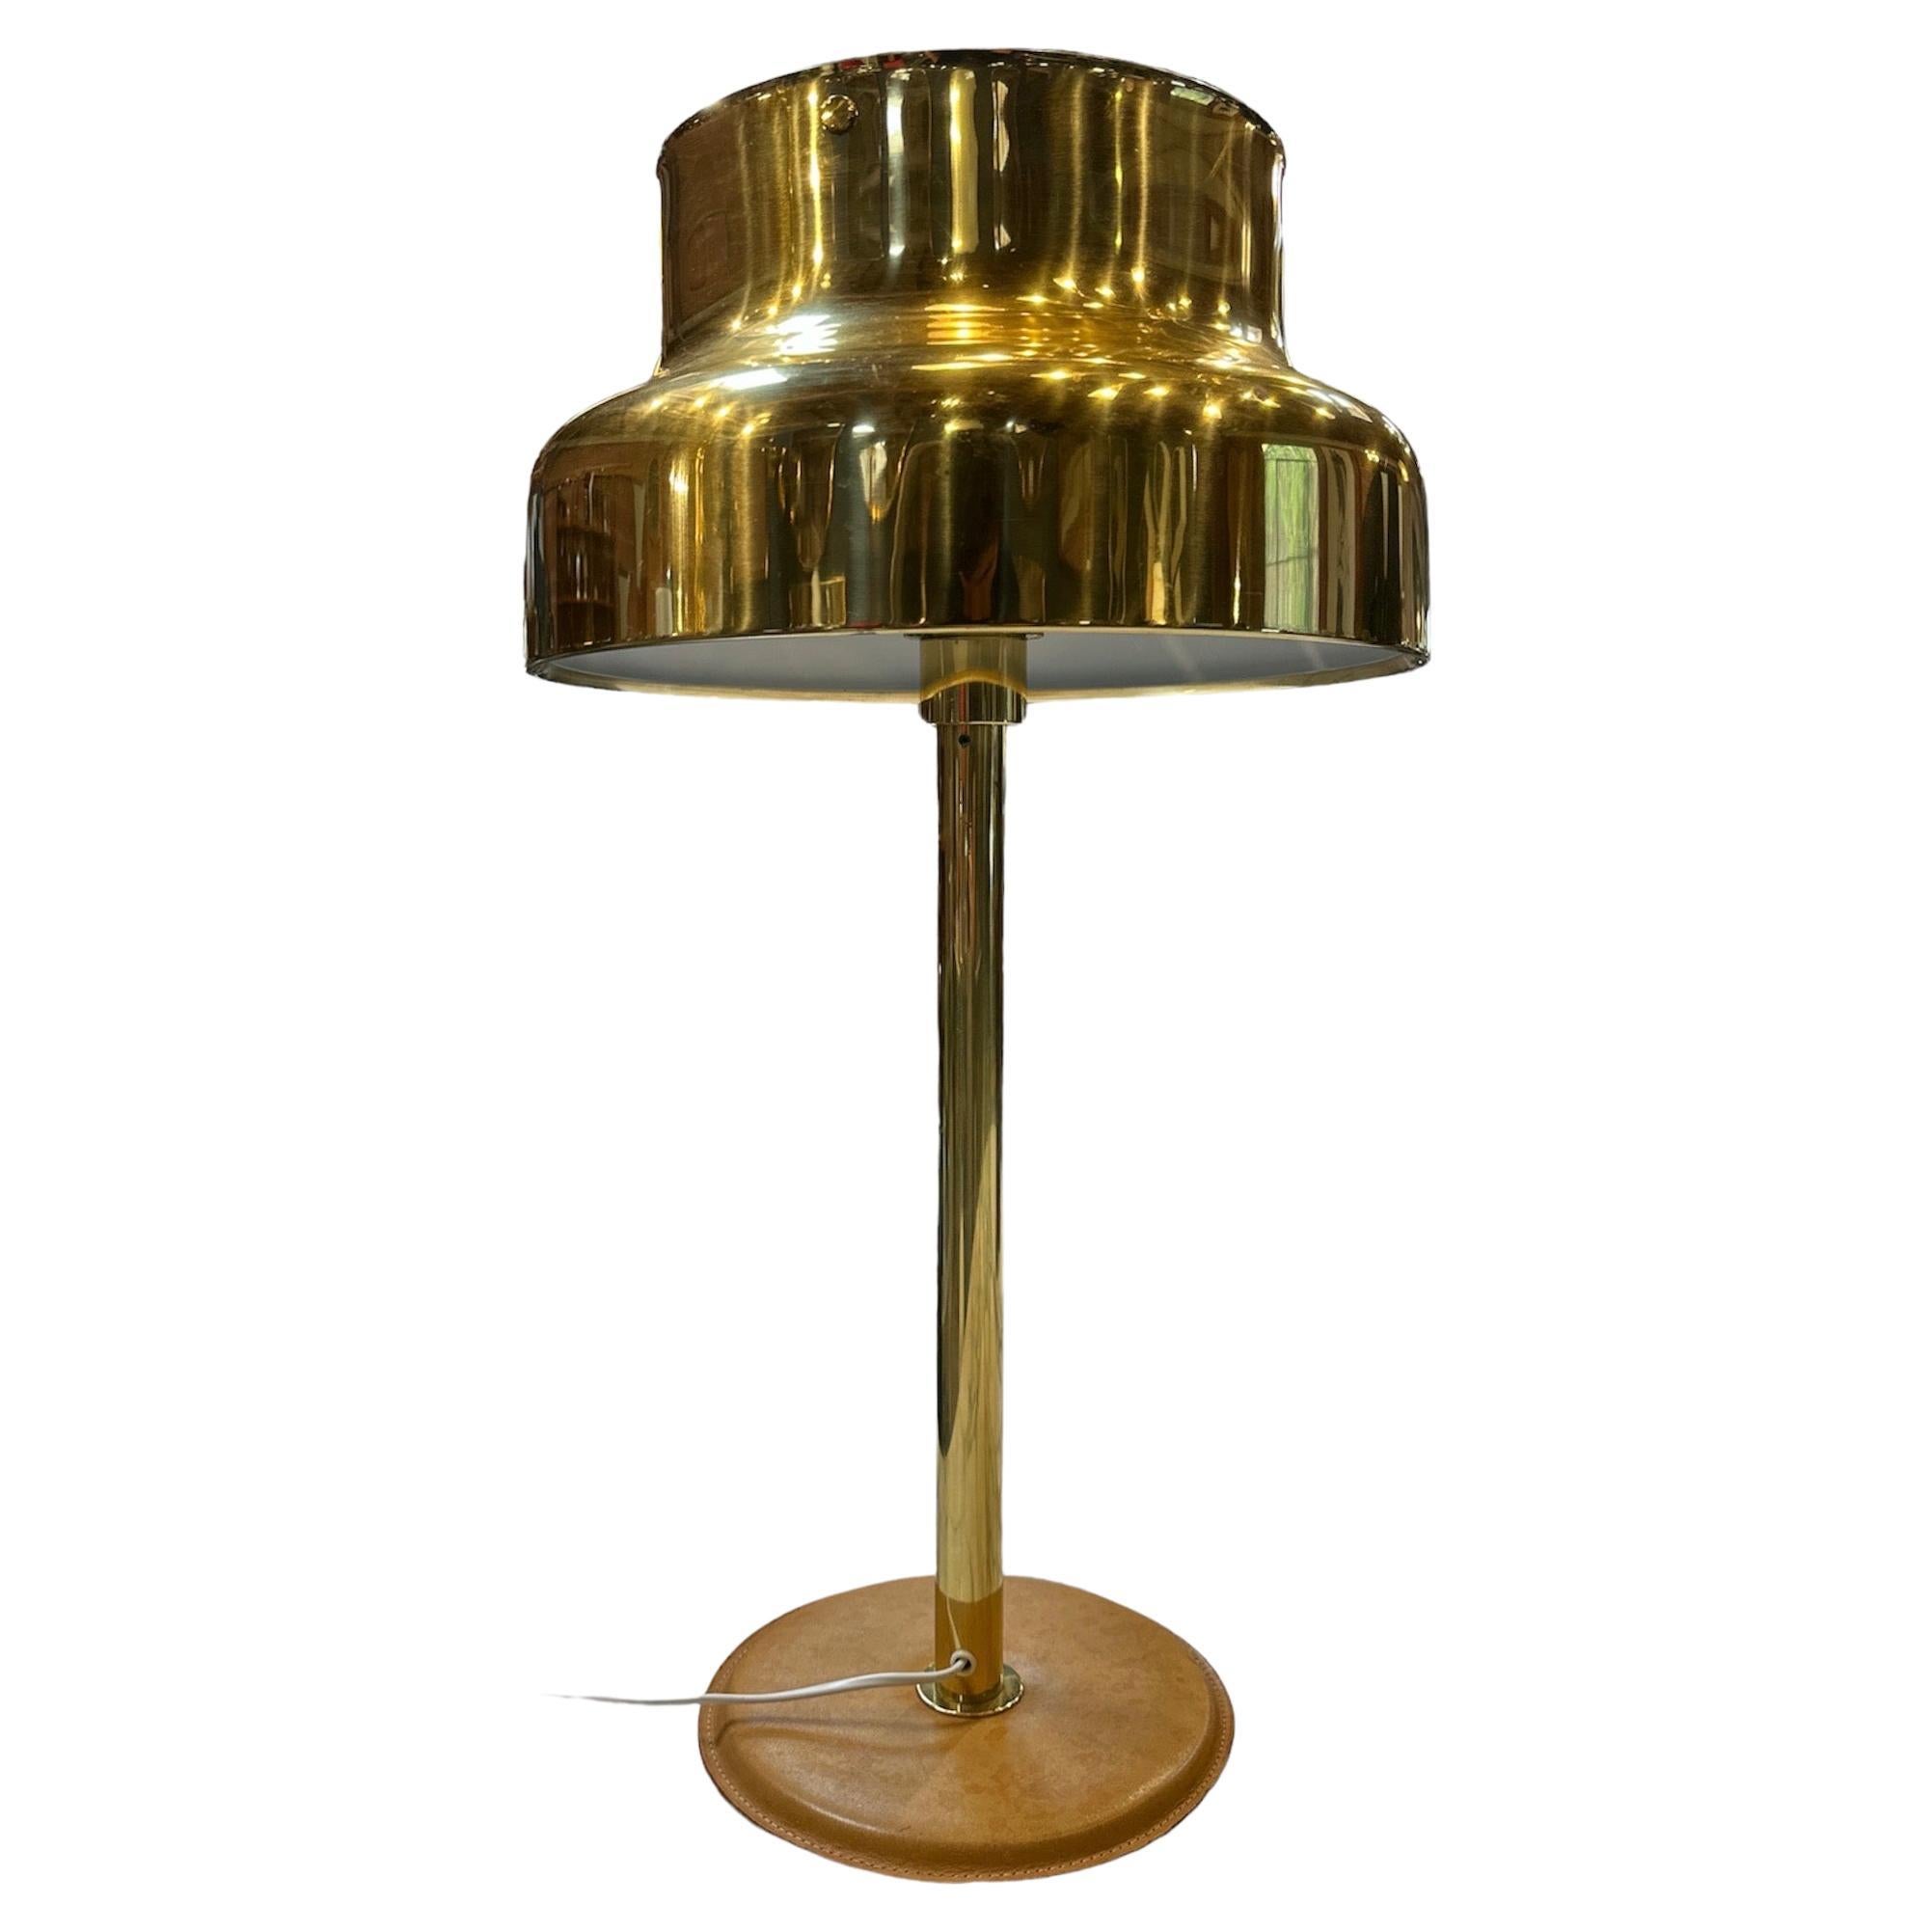 Anders Pehrson, Early "Bumling" Table Lamp, Brass, Ateljé Lyktan, Sweden, 1960s For Sale